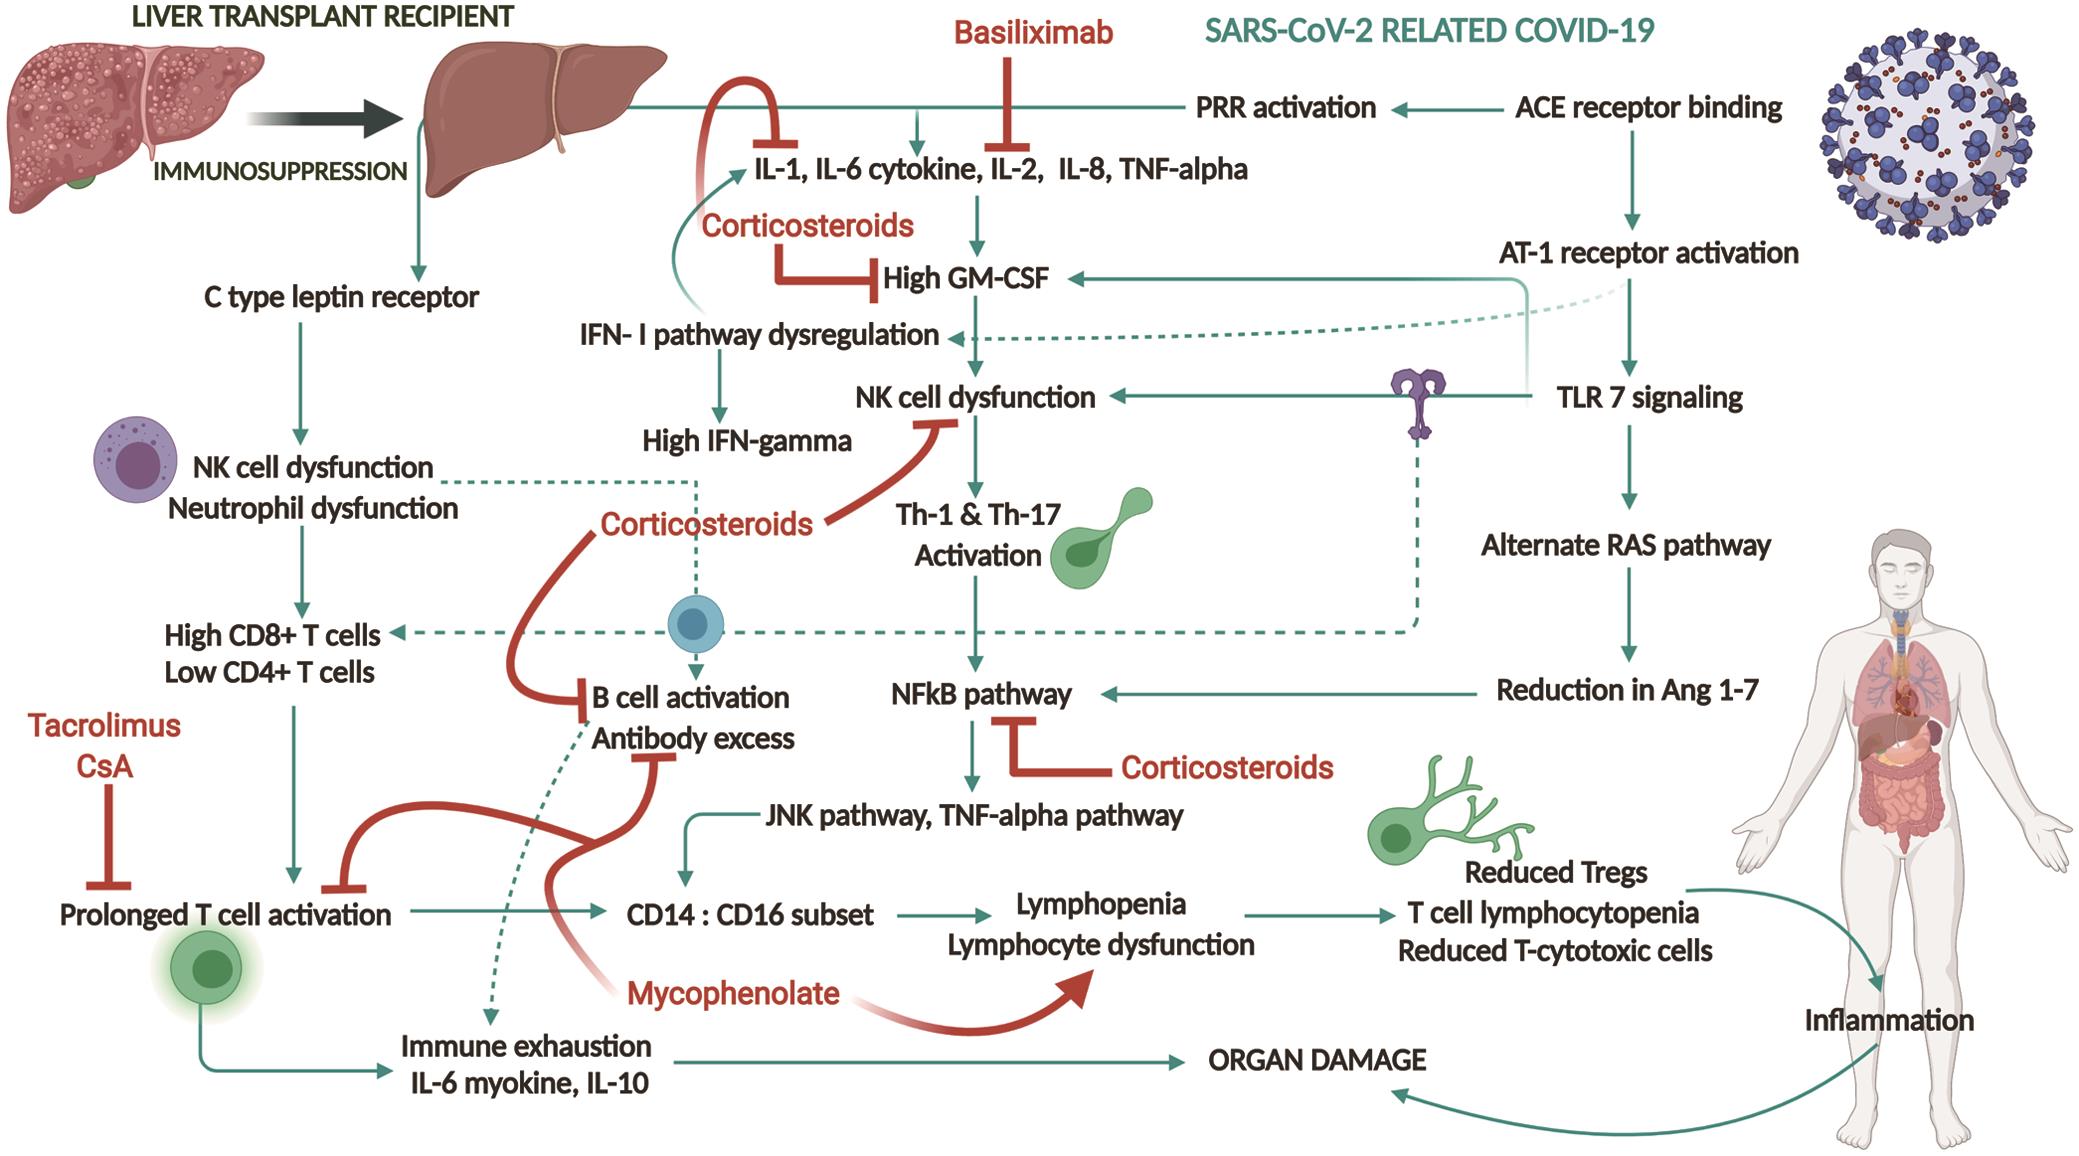 Schematic diagram showing immunopathogenesis of COVID-19 and immunology of liver transplant recipients and pathways affected by IS that contribute to disease progression or reduction in clinical severity.